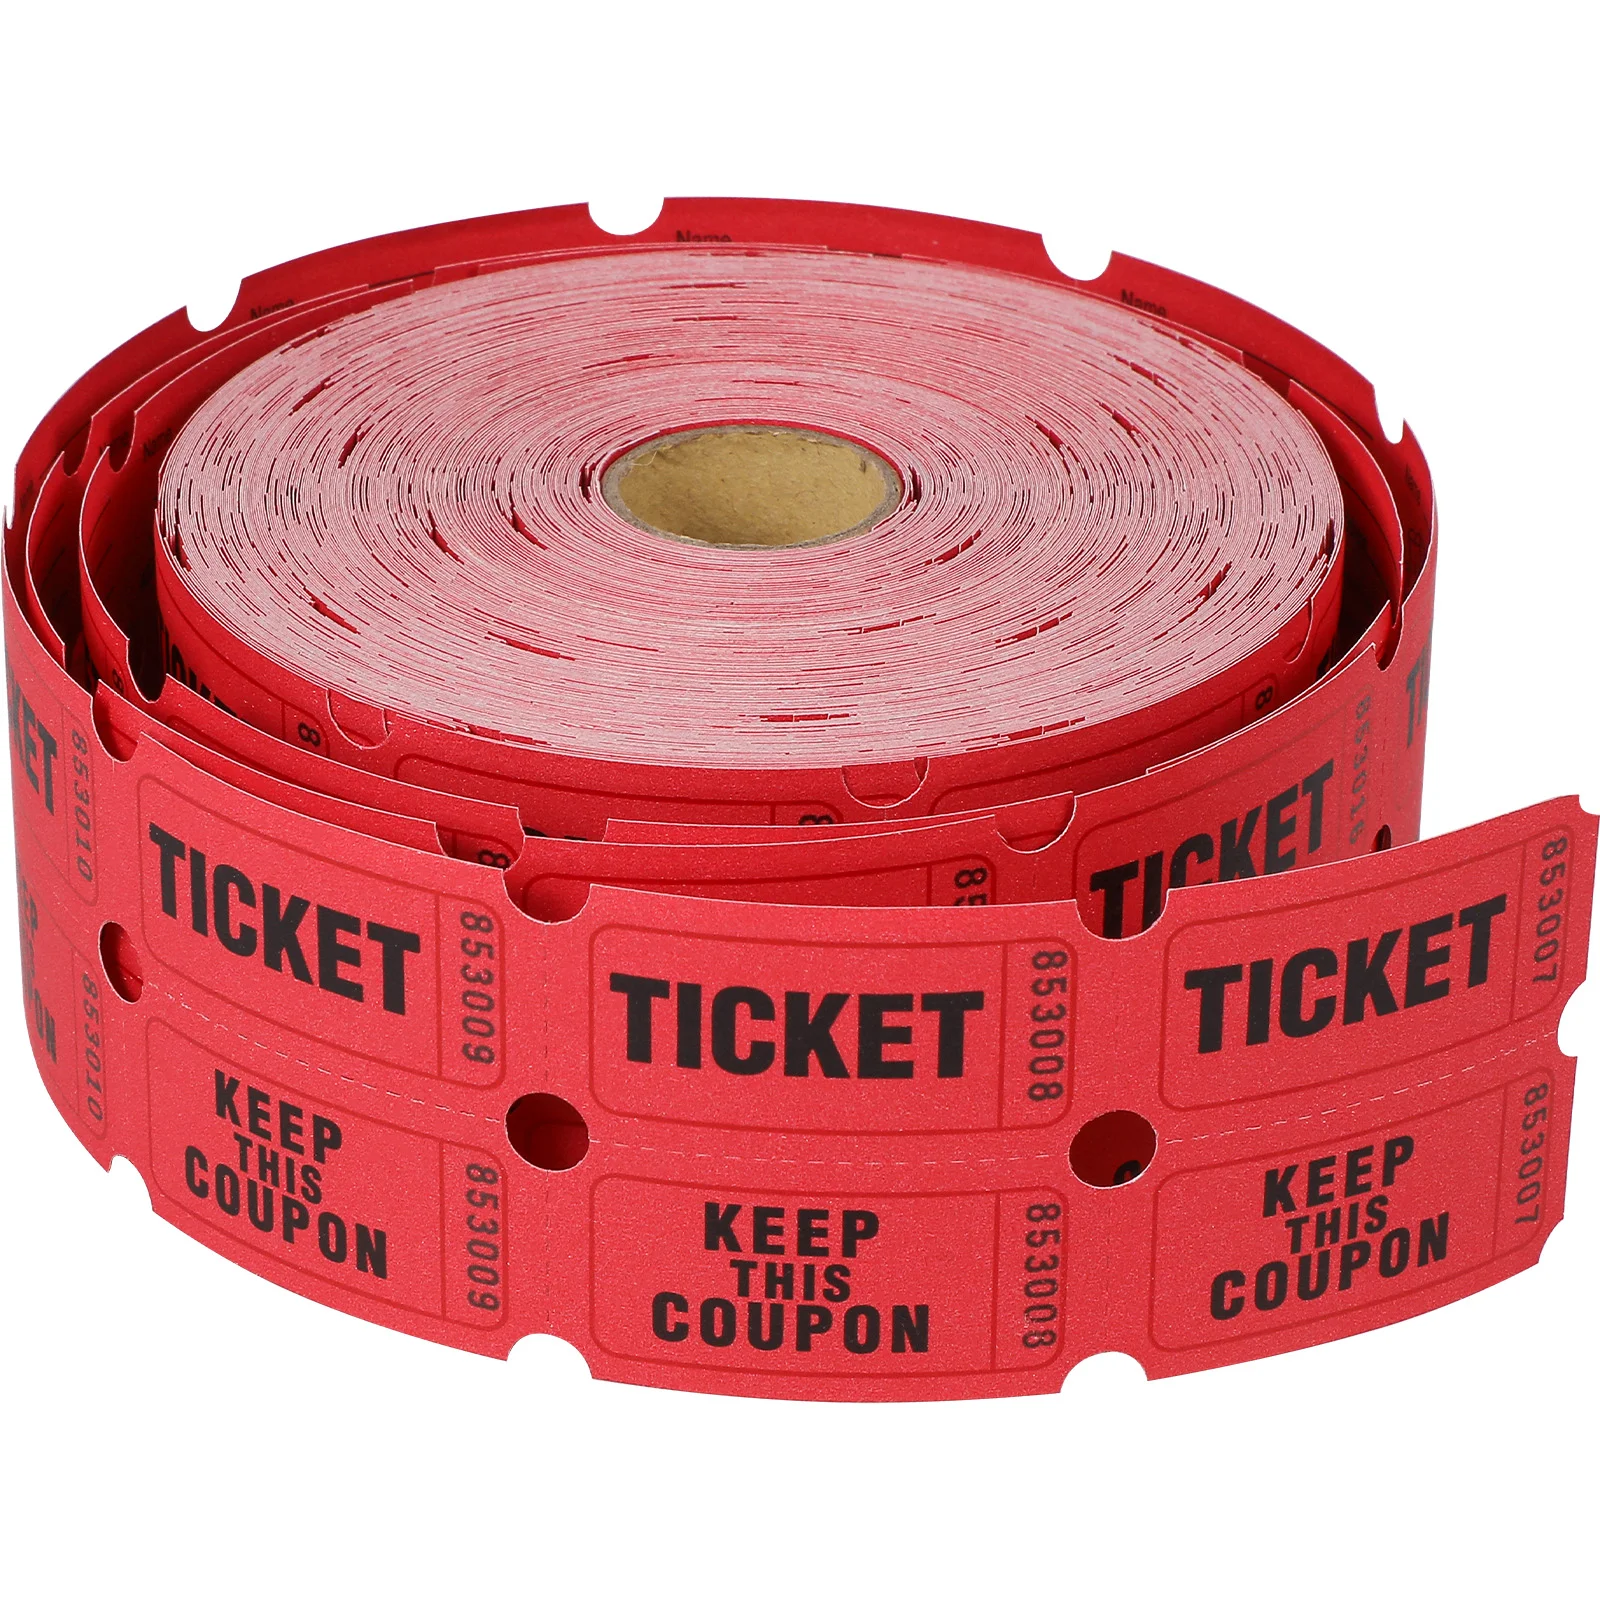 

Lottery Ticket Red Tickets Auctions for Party Event Raffle Concert Labels Movie Events Carnival